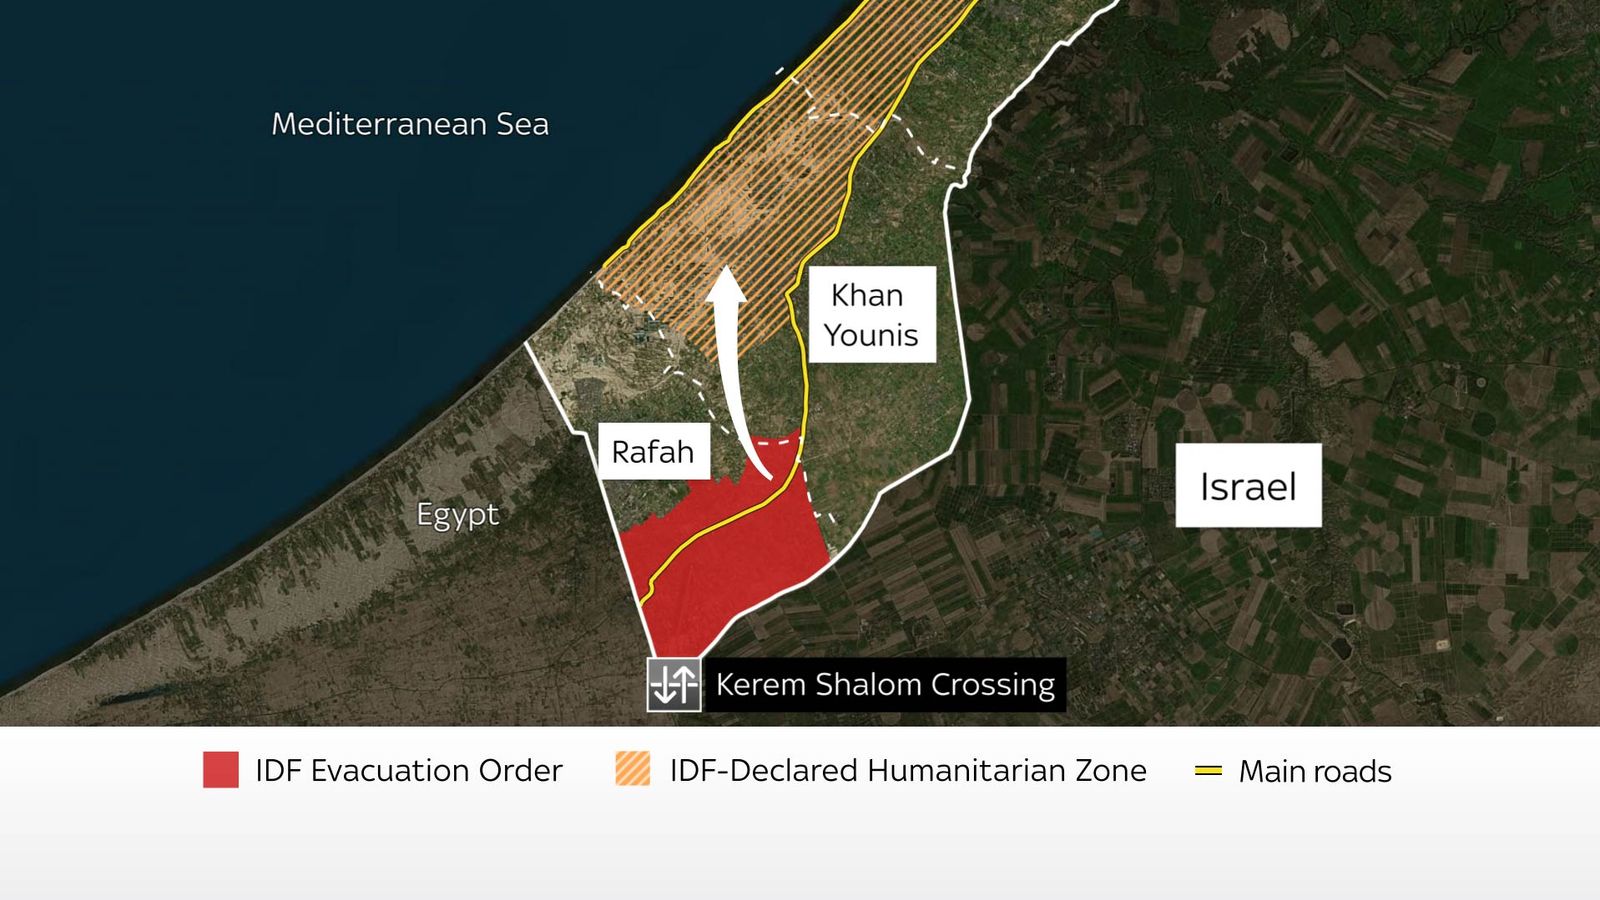 israel claims control of key rafah crossing after rejecting ceasefire deal